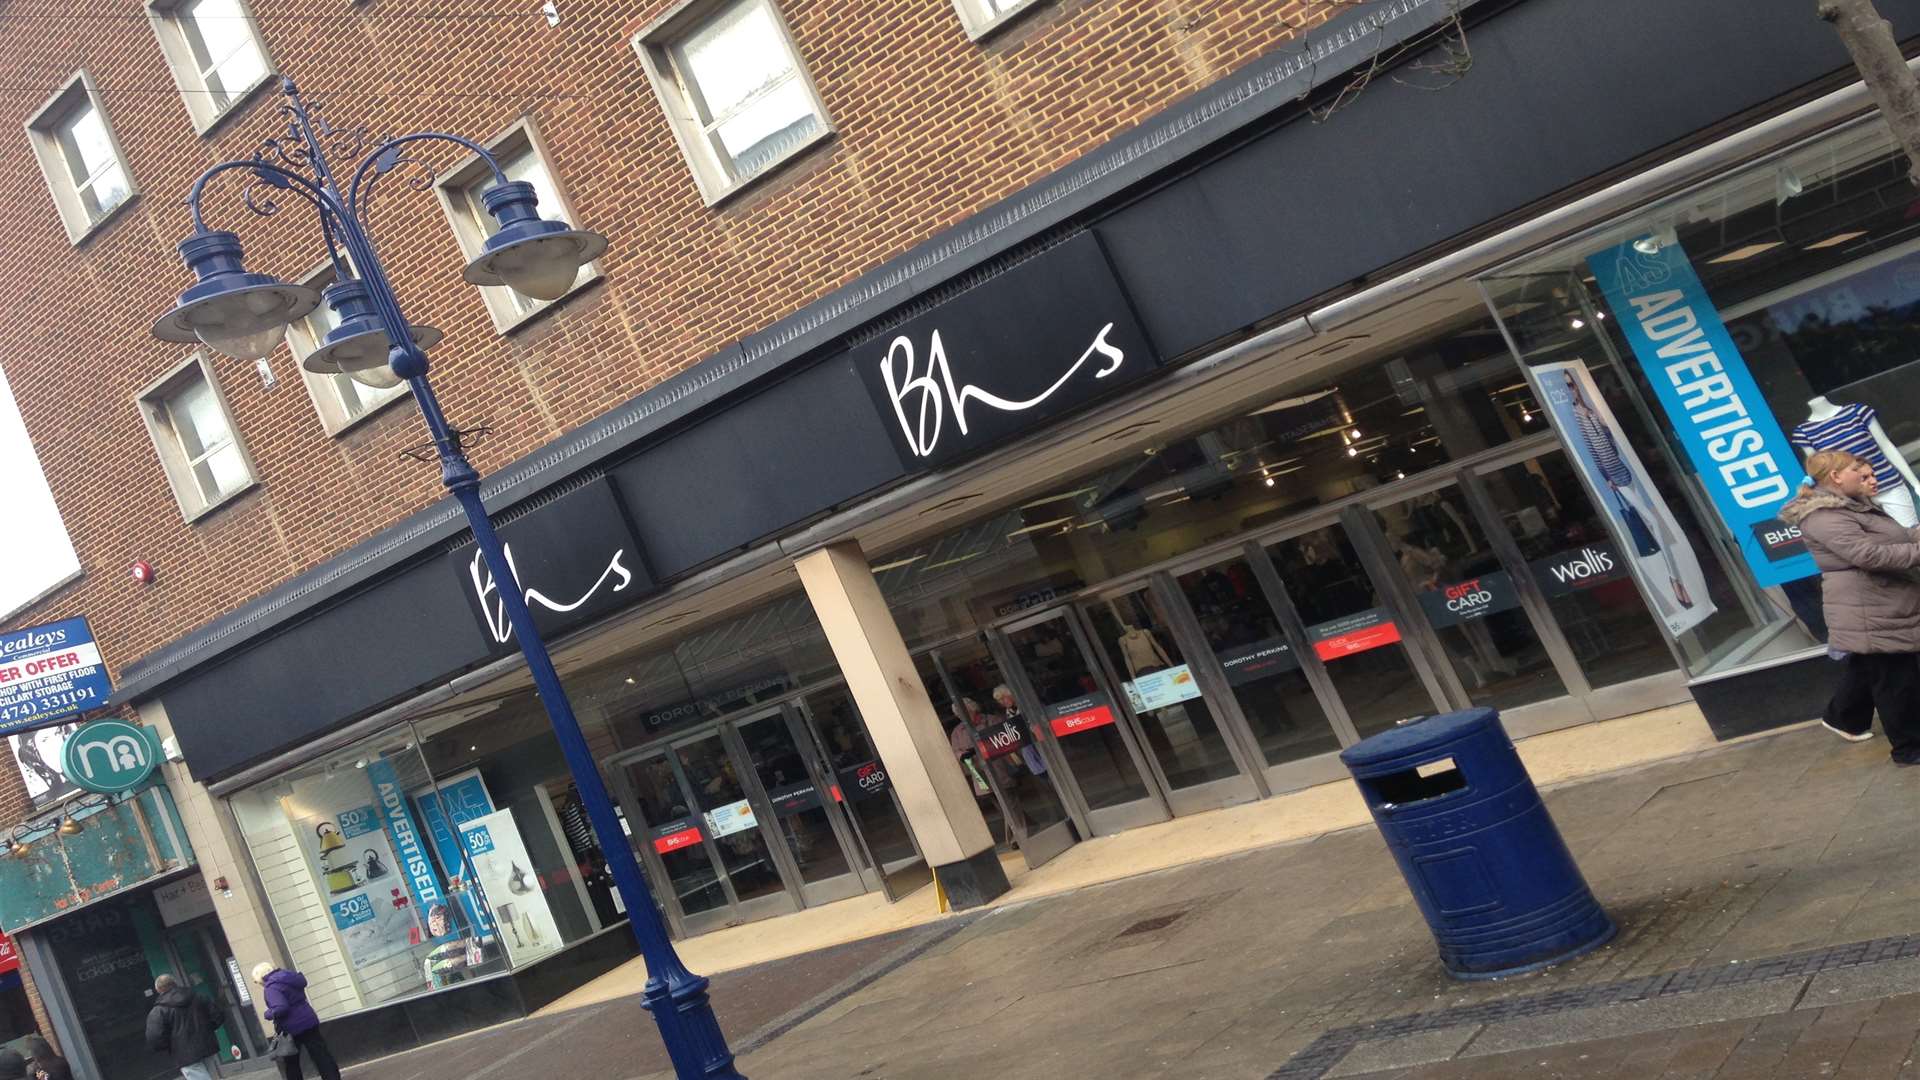 The BHS store in New Road, Gravesend